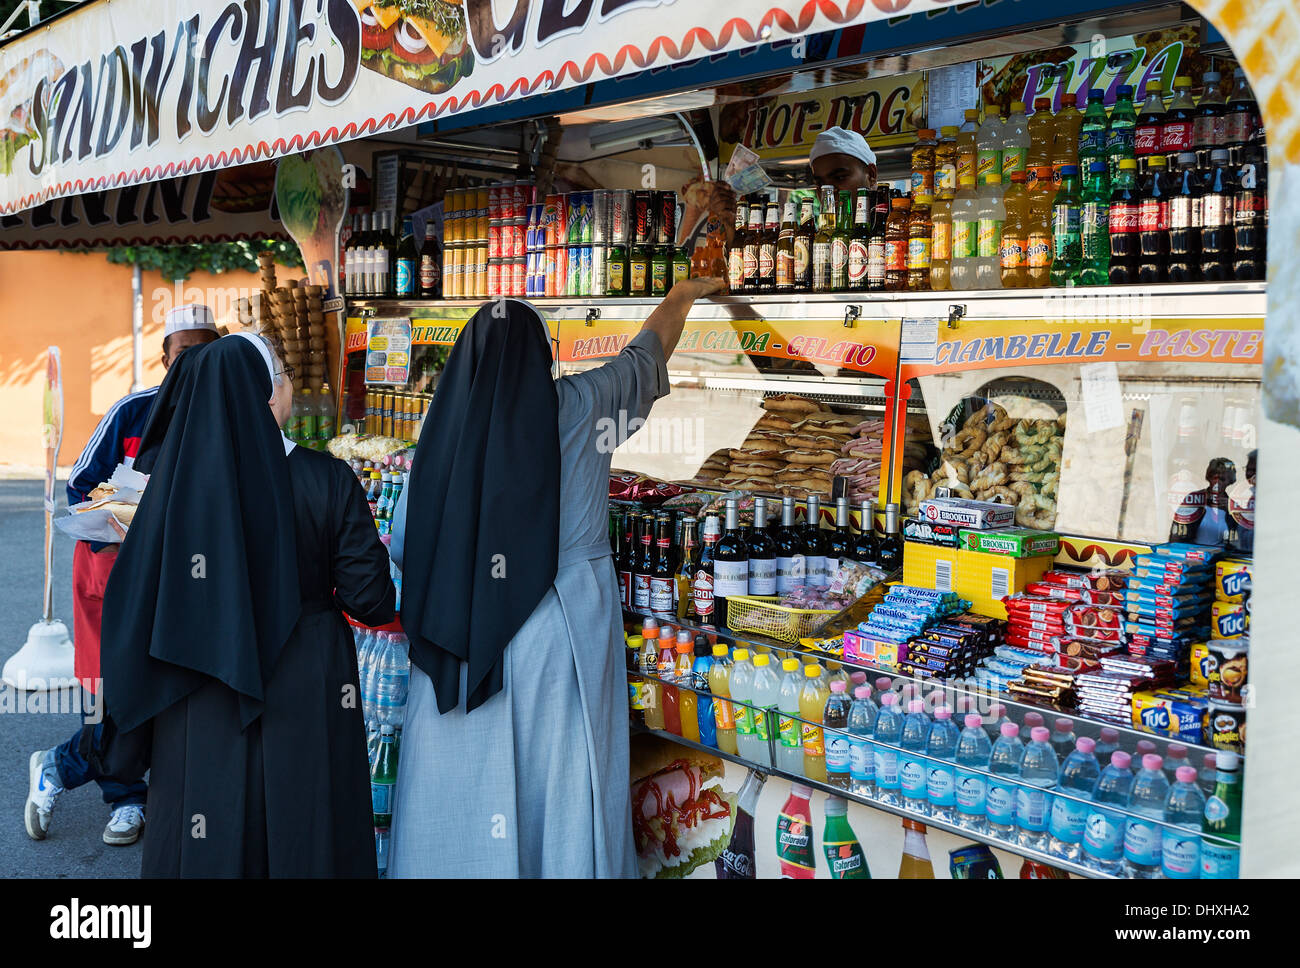 Two nuns buy food at a concession stand, Rome, Italy Stock Photo